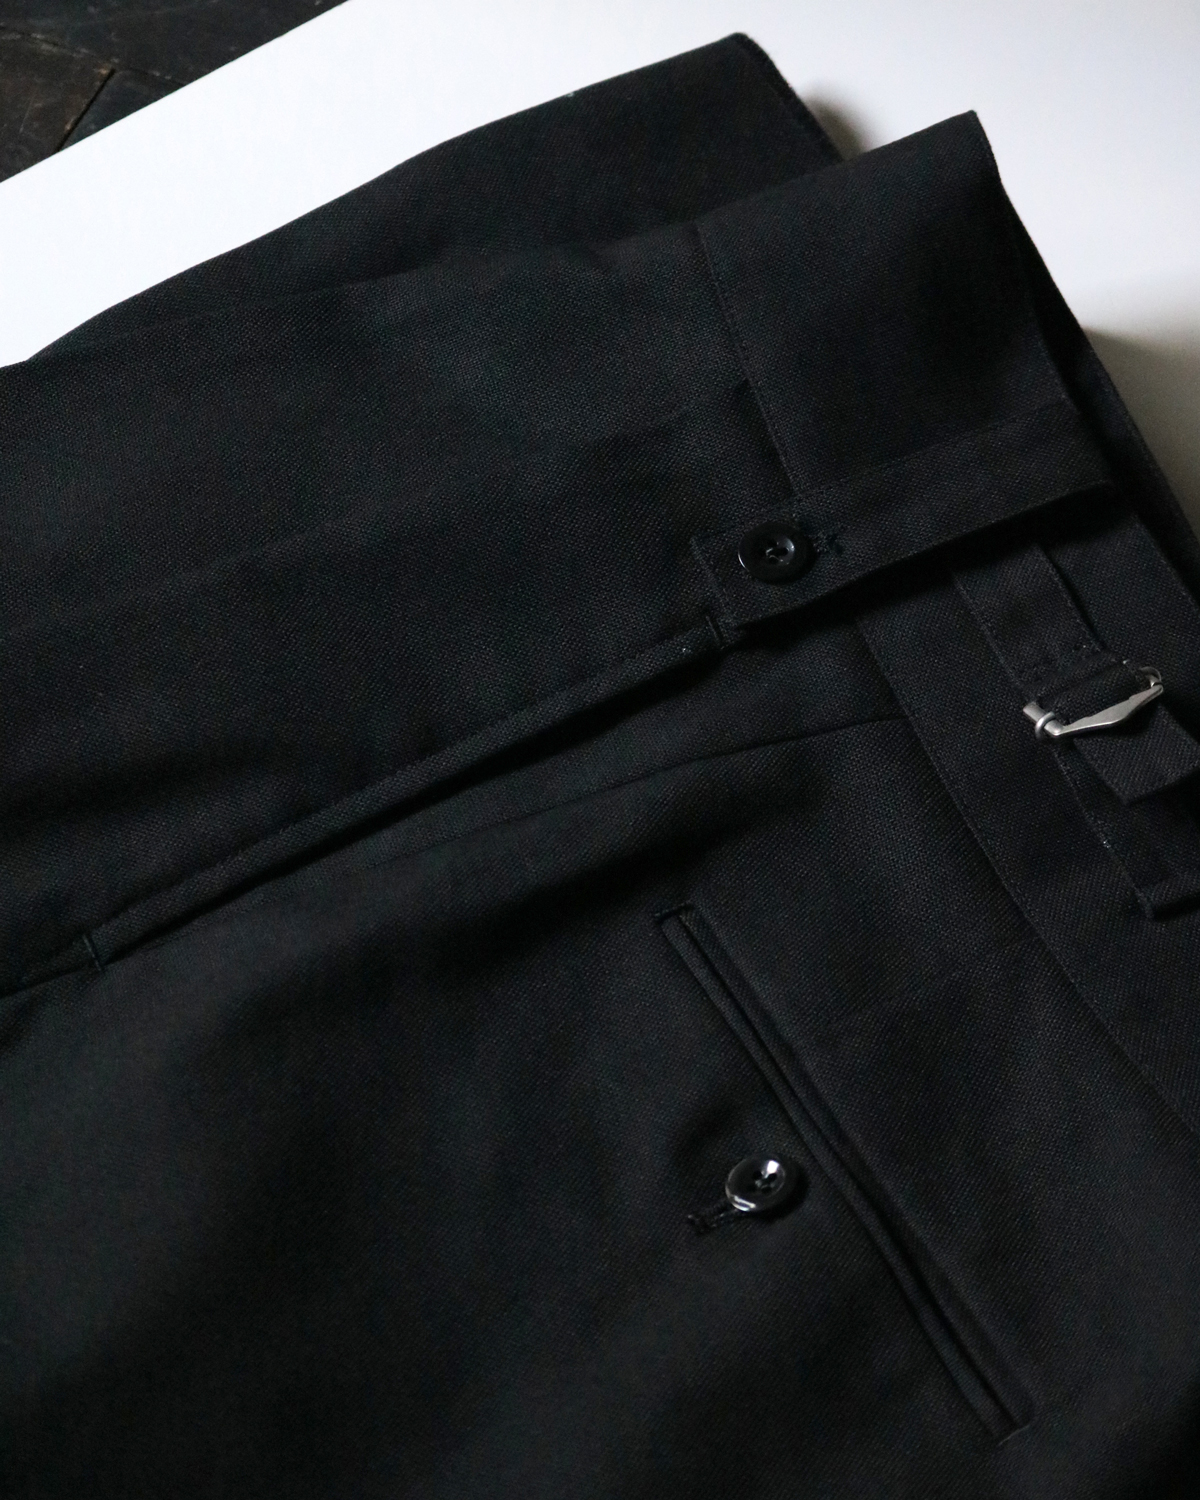 NEAT｜HOPSACK｜BELTLESS - Black｜PRODUCT｜Continuer Inc.｜メガネ 